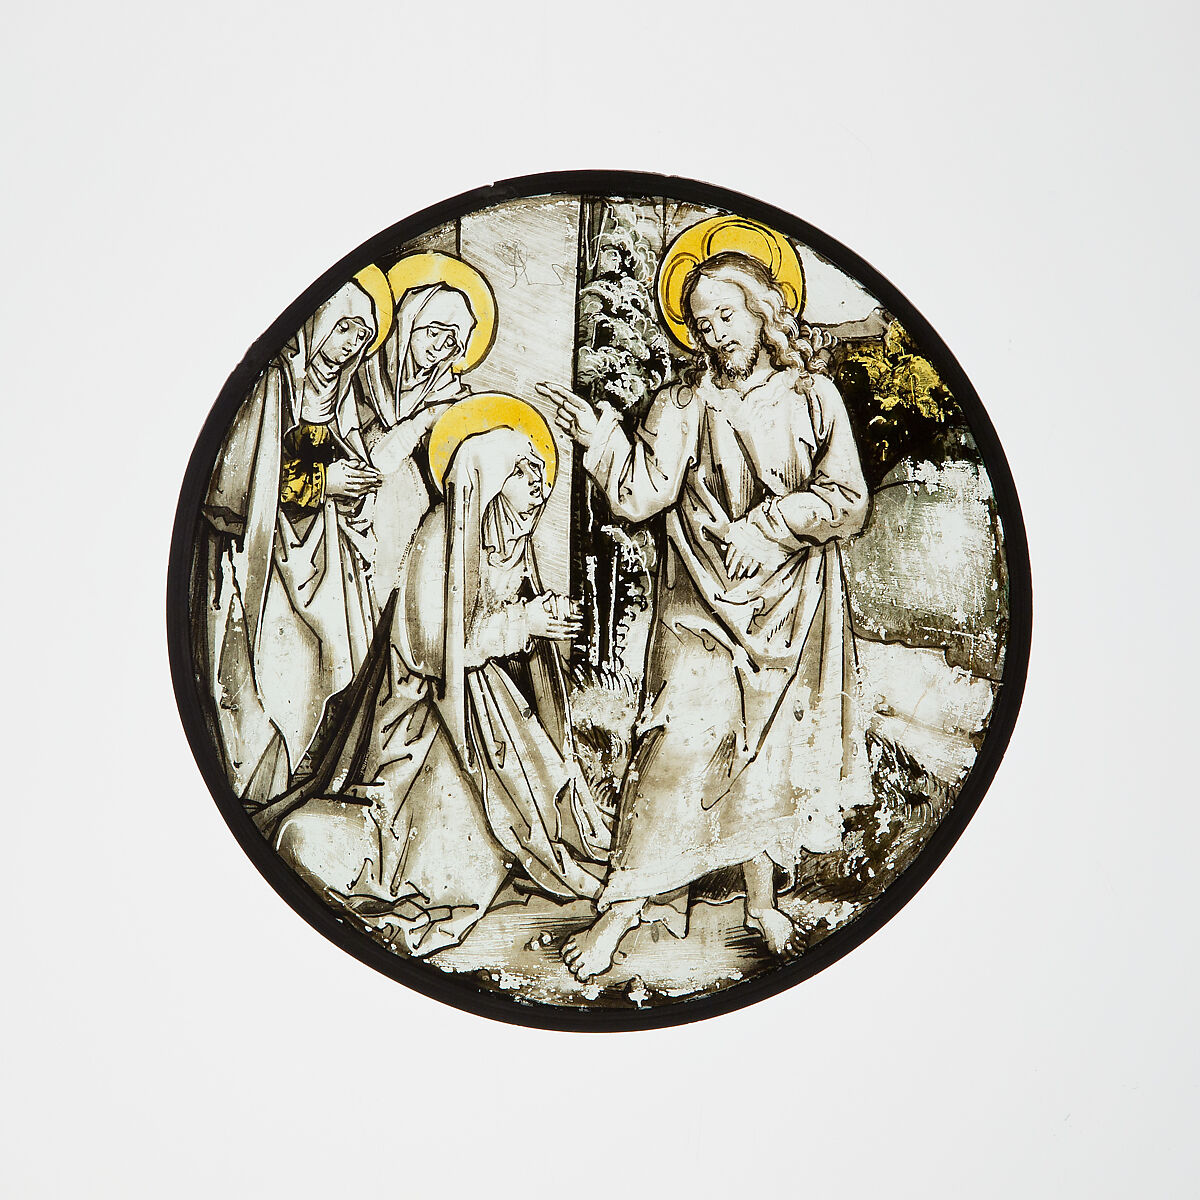 Roundel with Christ Taking Leave of His Mother, After Hans Schäufelein (German, Nuremberg ca. 1480–ca. 1540 Nördlingen), Colorless glass, vitreous paint and silver stain, South German 